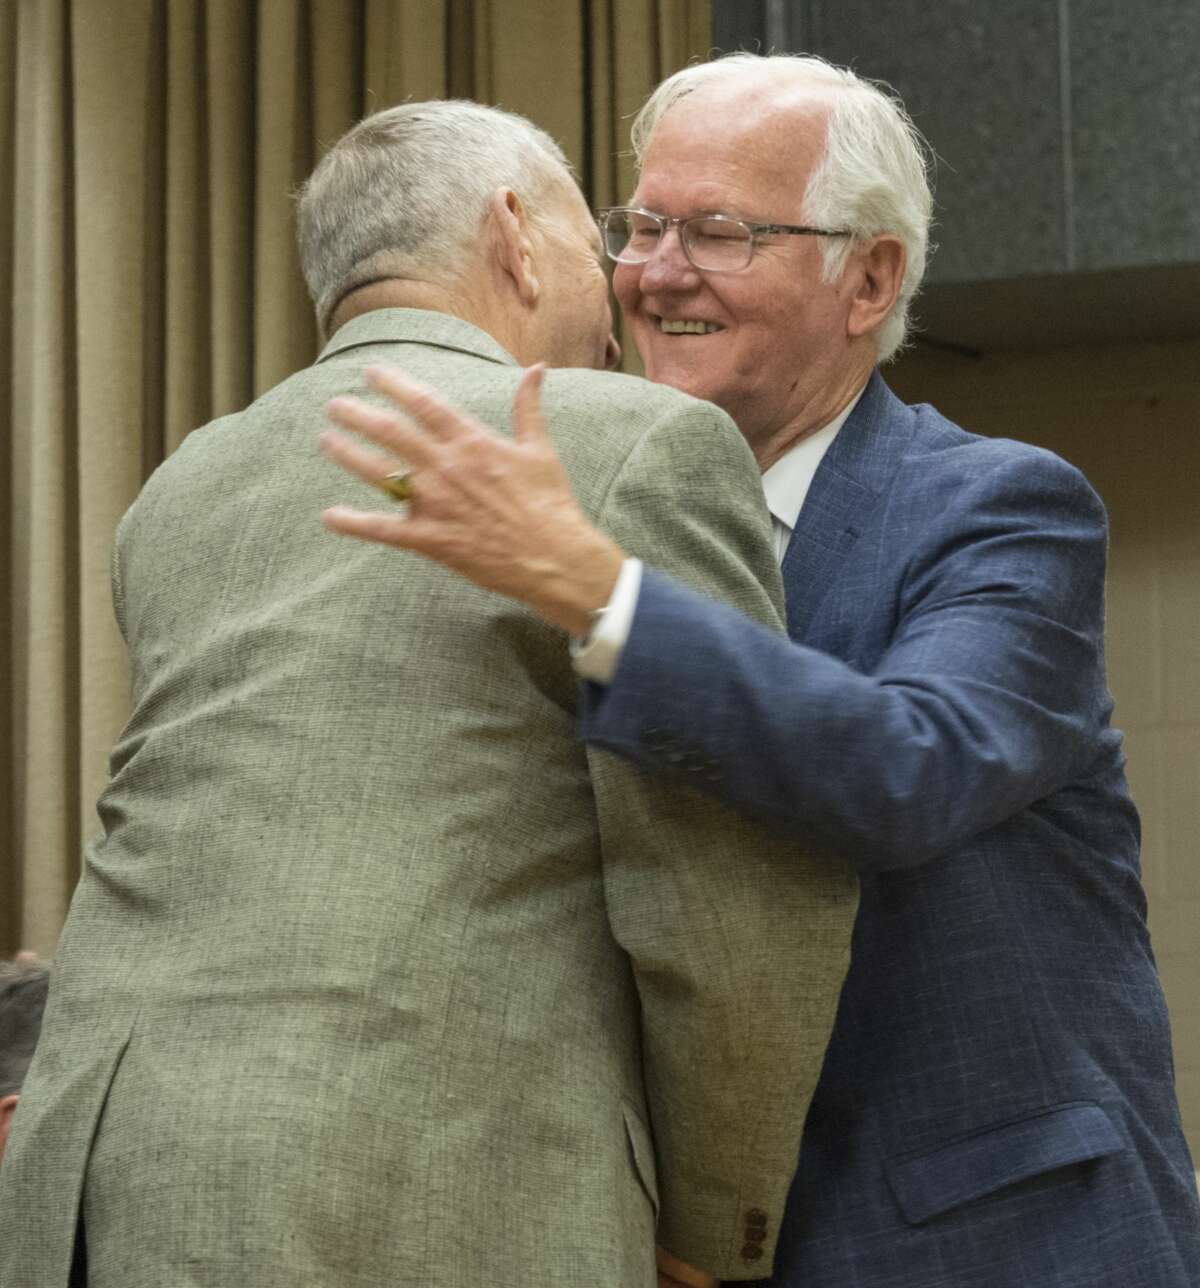 Midland County Judge Mike Bradford, right, gets a hand shake and a hug after introducing retired U.S. Army Gen. Tommy Franks during the Aug. 24 dedication of General Tommy Franks Elementary. A leadership program presented by The General Tommy Franks Leadership Institute is planned for June at Midland College.